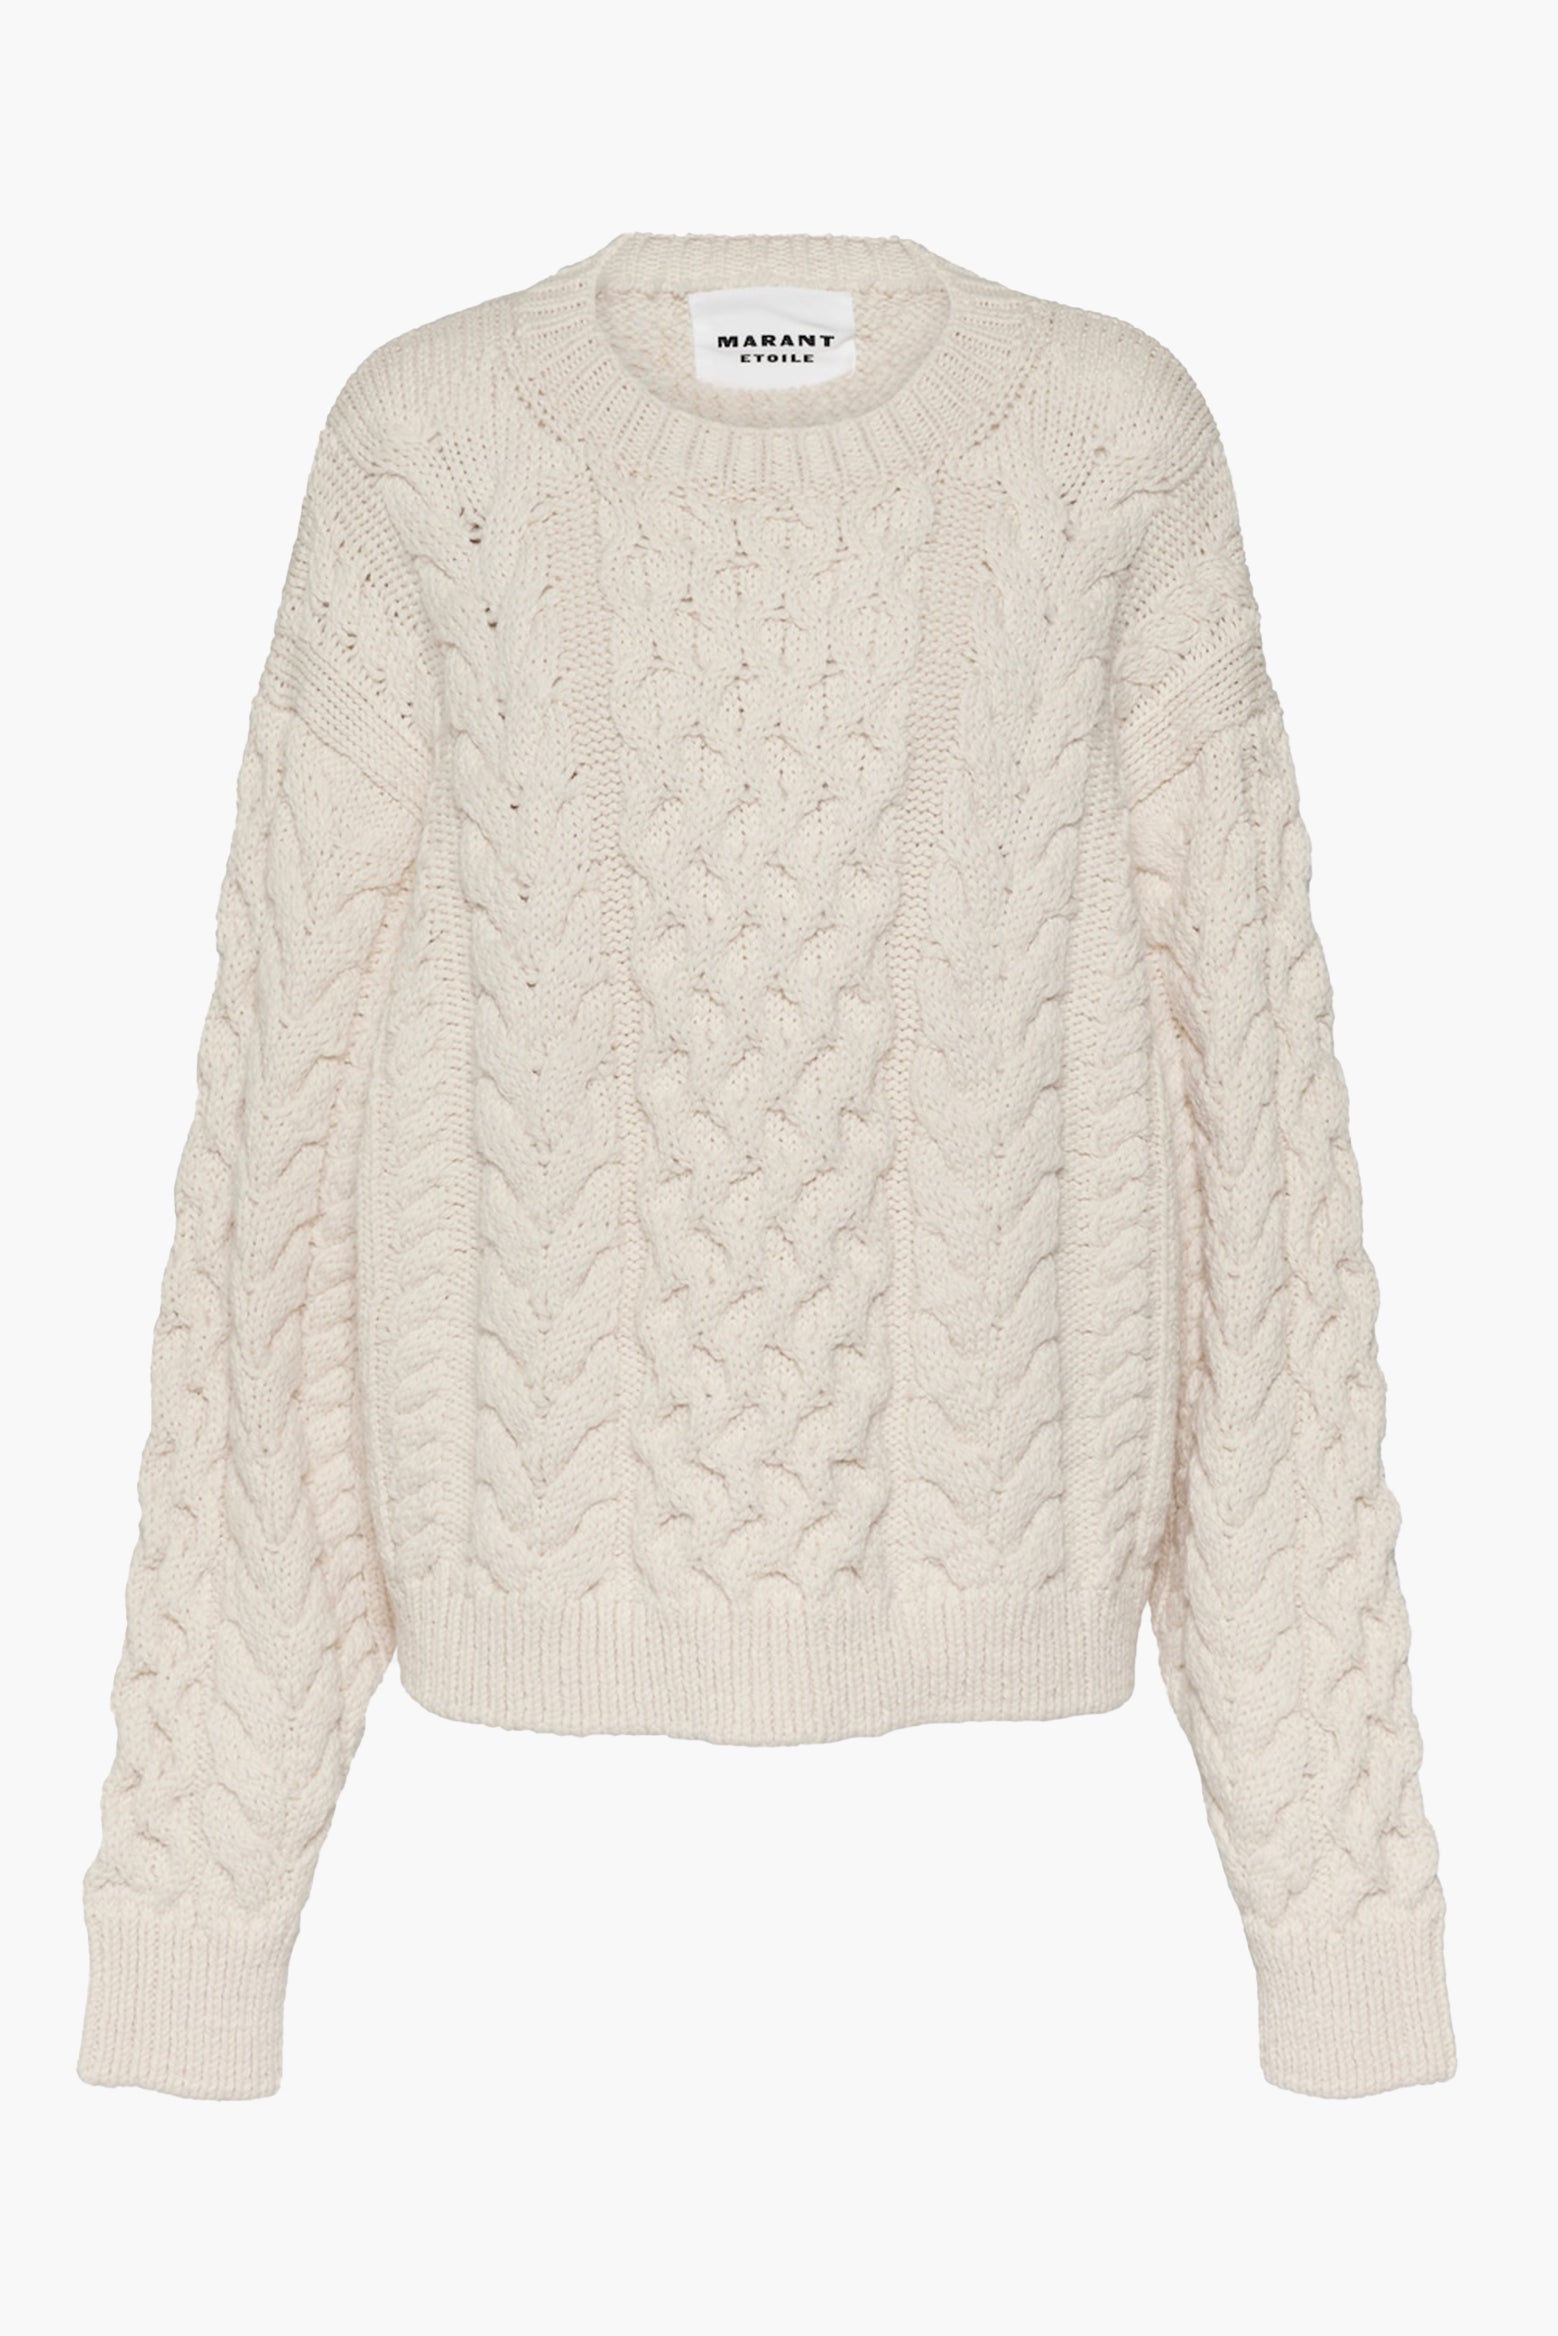 The Isabel Marant Etoile Jake Pullover in Ecru available at The New Trend Australia